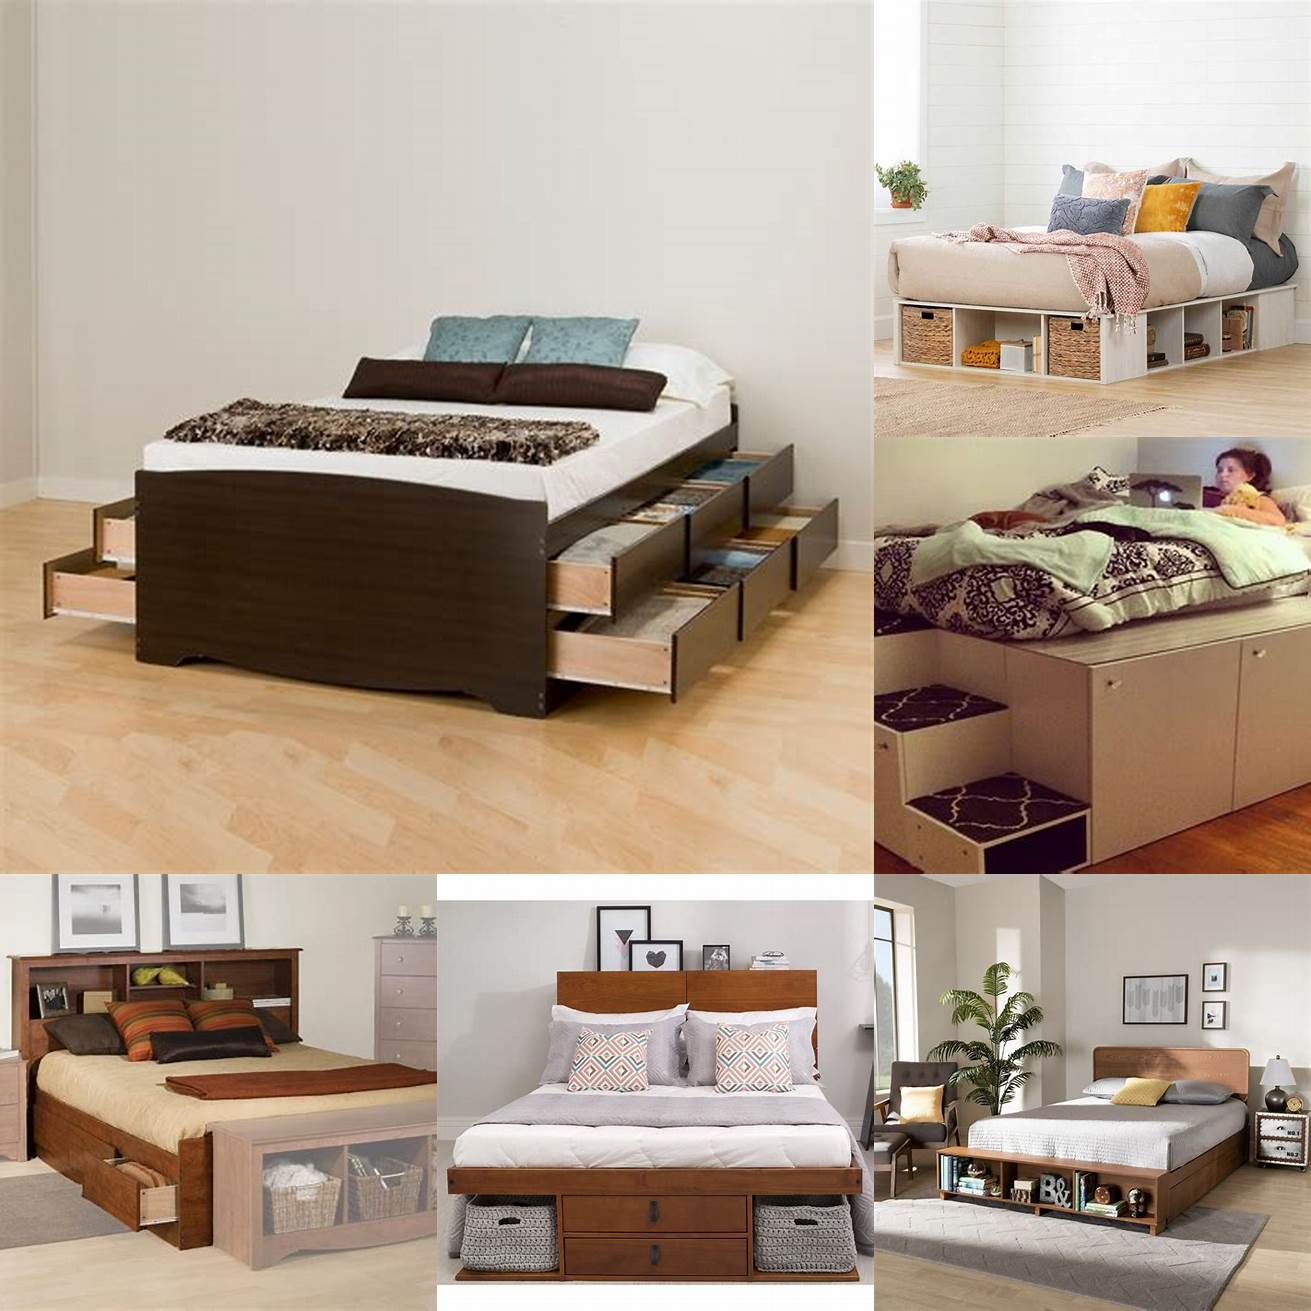 Space-saving Platform bed storage provides additional storage space without taking up extra floor space in your bedroom